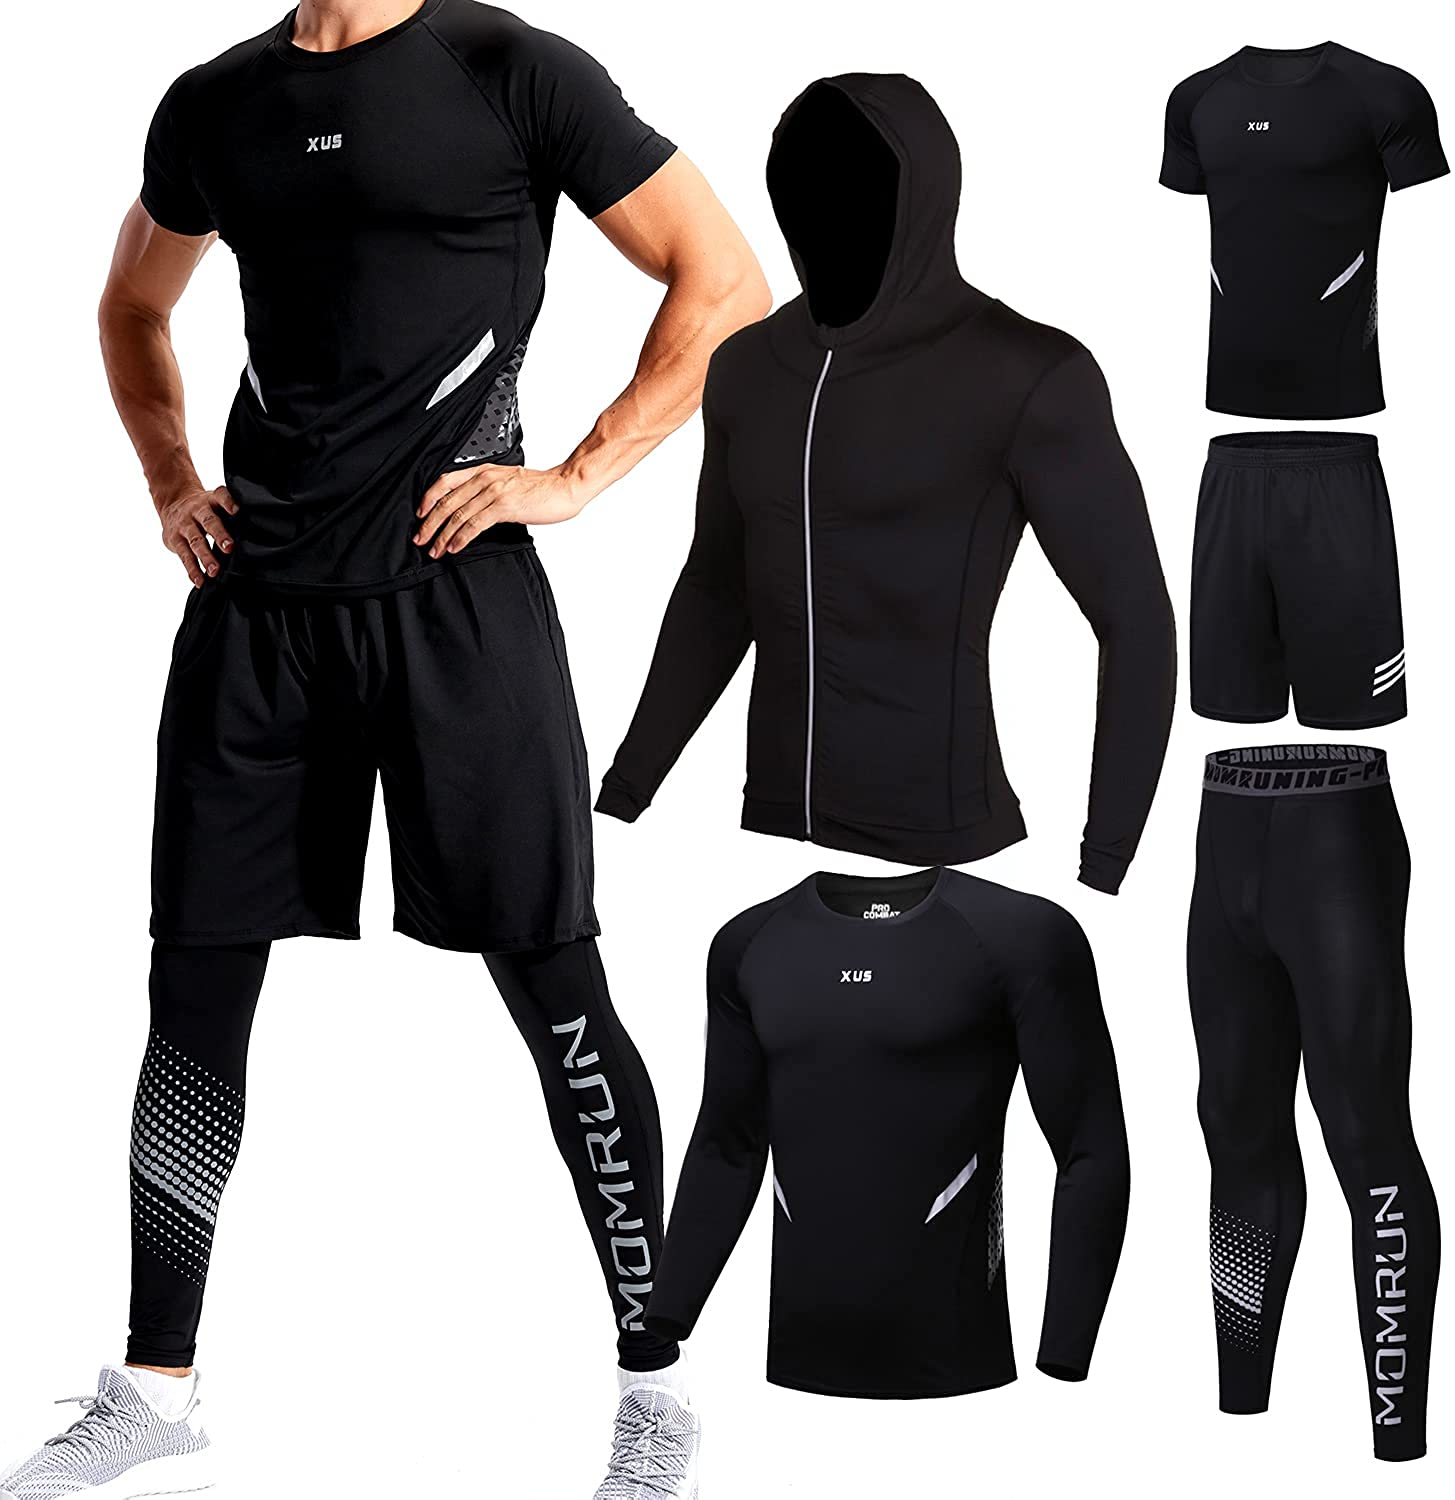 Best Fitness gears for home workout - Sporto Equip